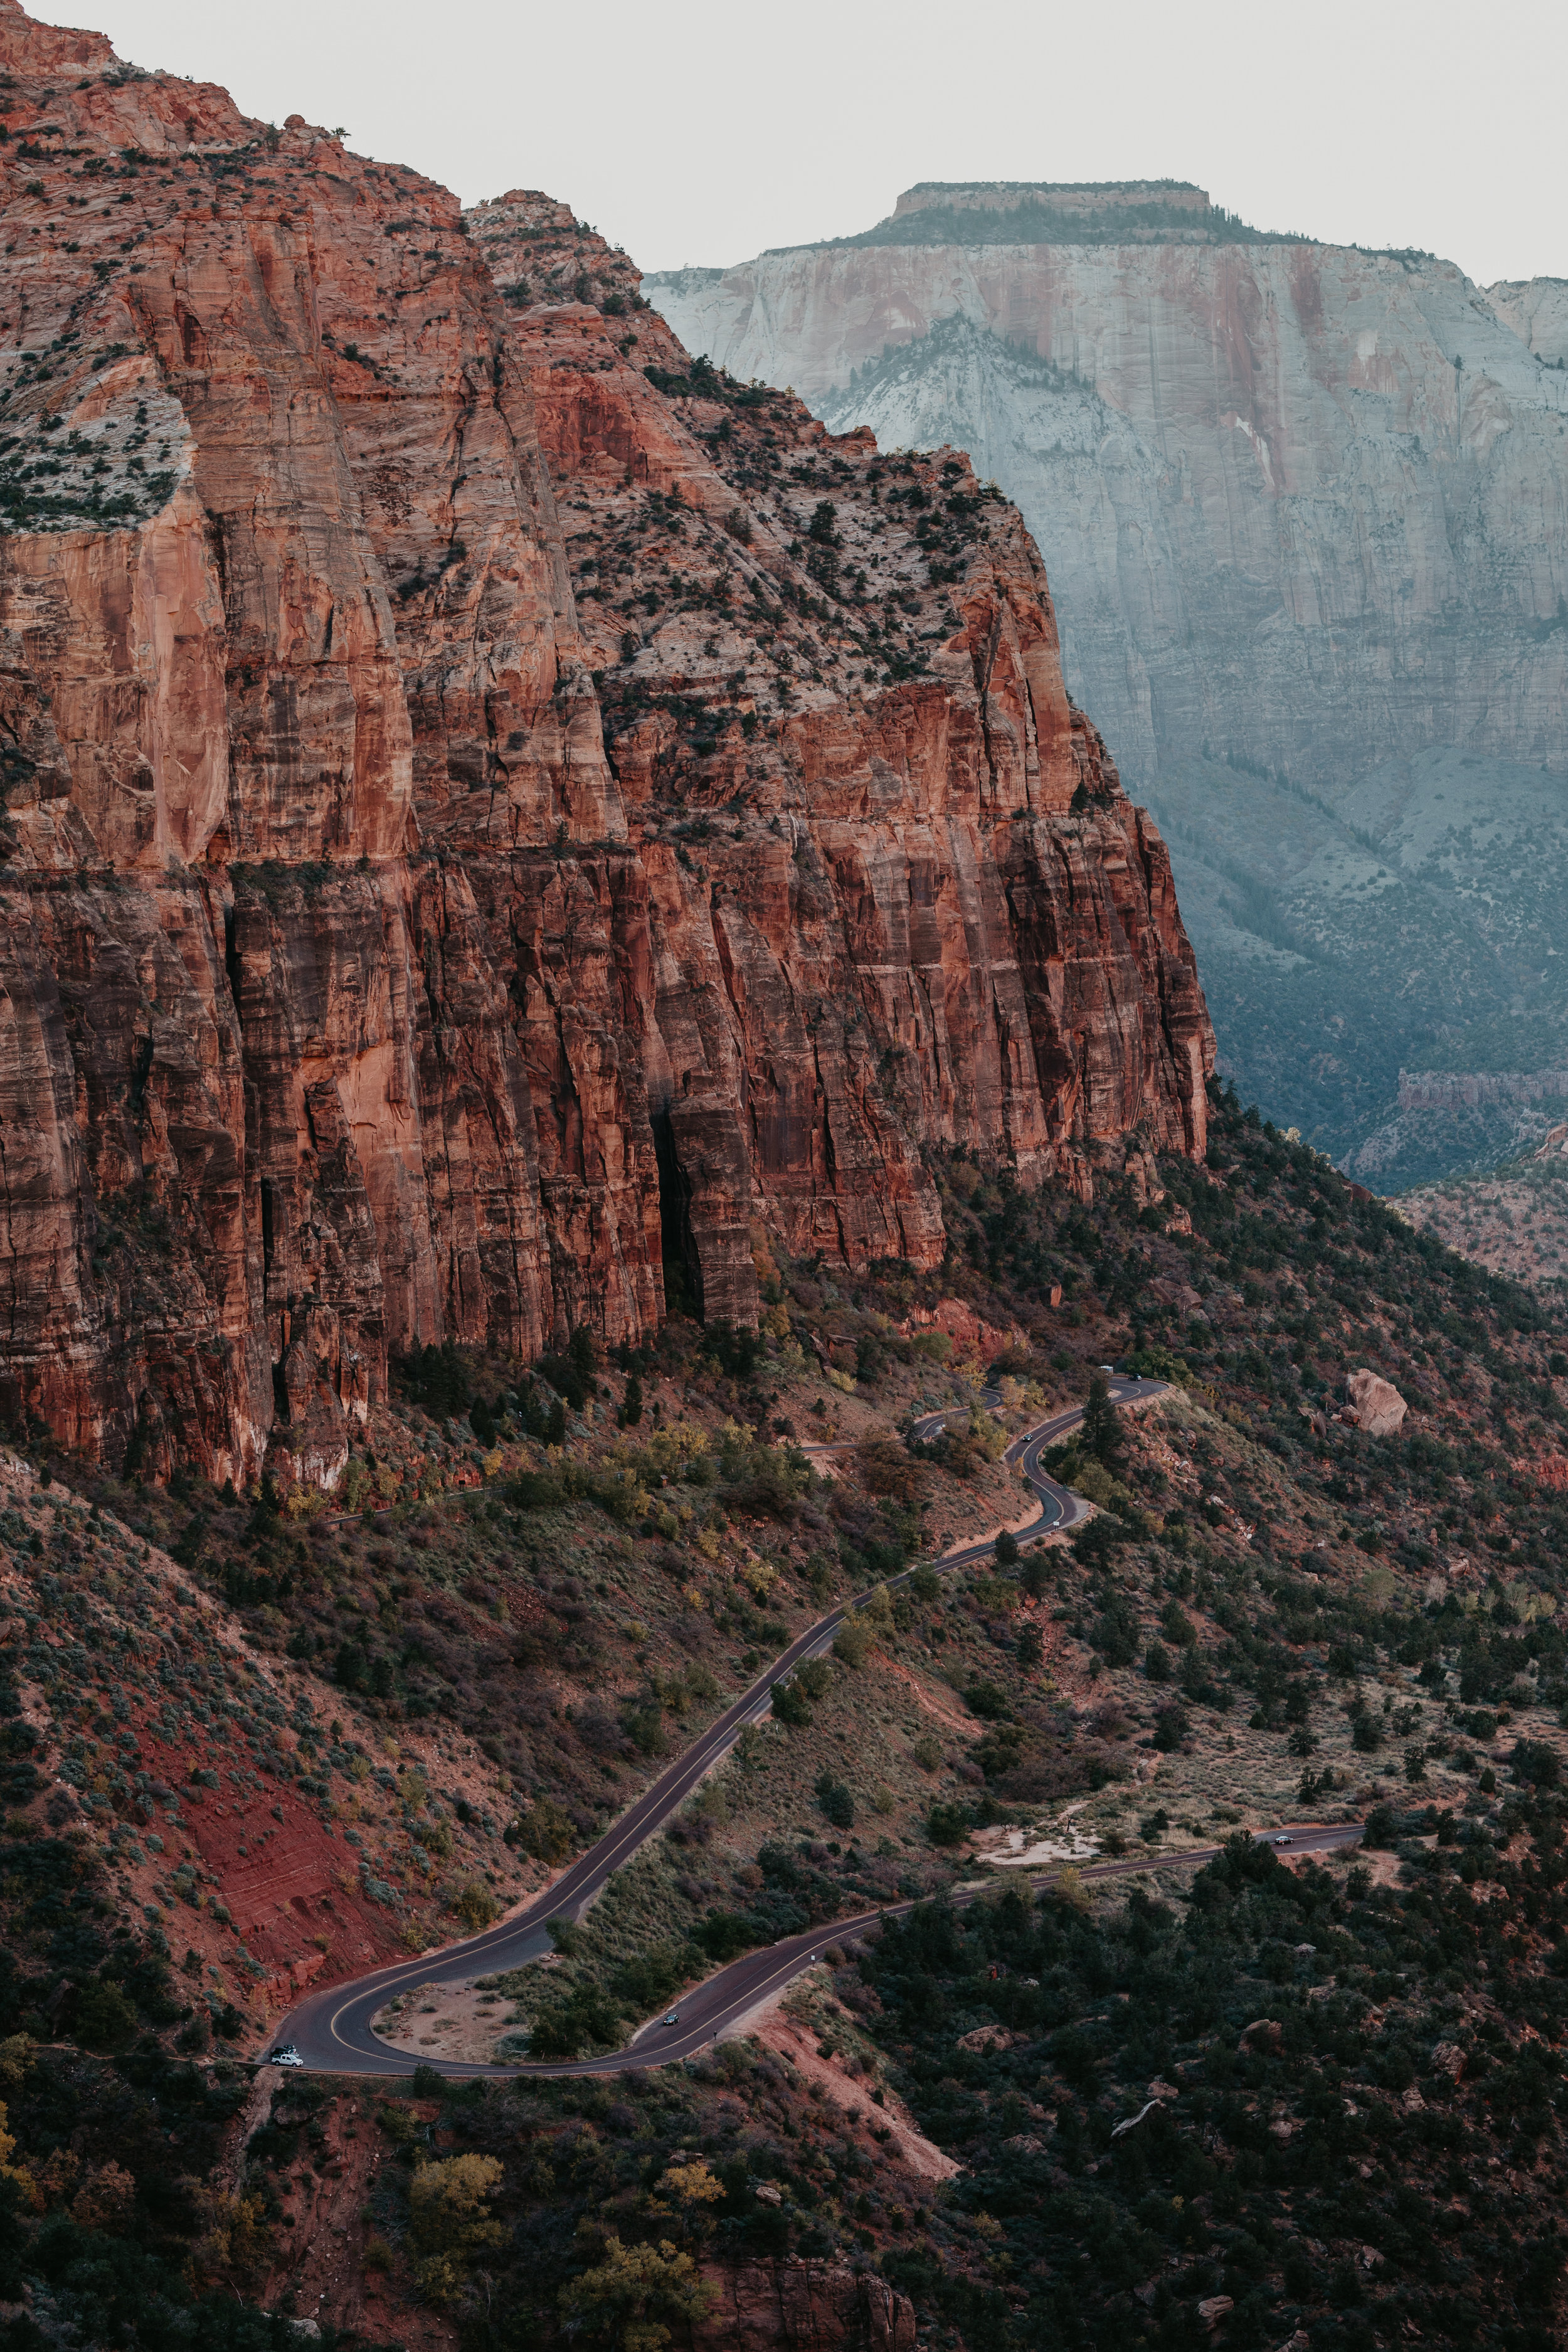 nicole-daacke-photography-zion-national-park-elopement-photographer-canyon-overlook-trail-elope-hiking-adventure-wedding-photos-fall-utah-red-rock-canyon-stgeorge-eloping-photographer-57.jpg